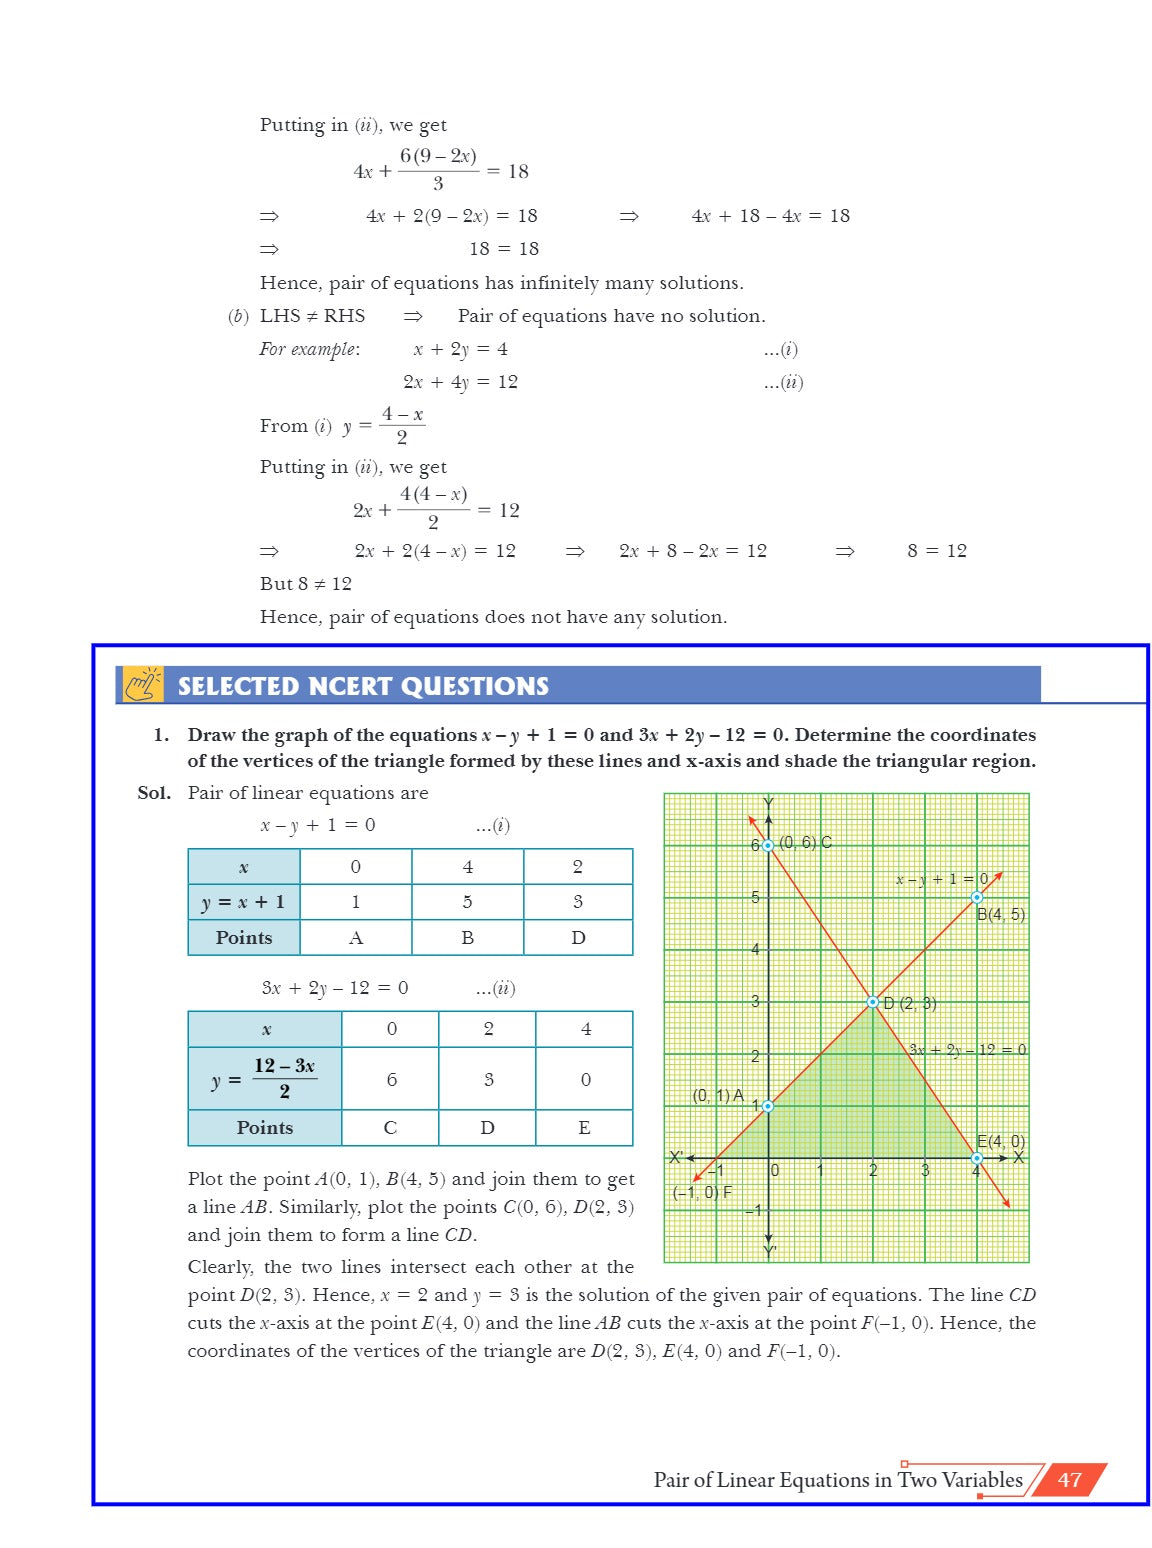 Xam idea Mathematics Class 10 Book | CBSE Board | Chapterwise Question Bank | Based on Revised CBSE Syllabus | NCERT Questions Included | 2024-25 Exam